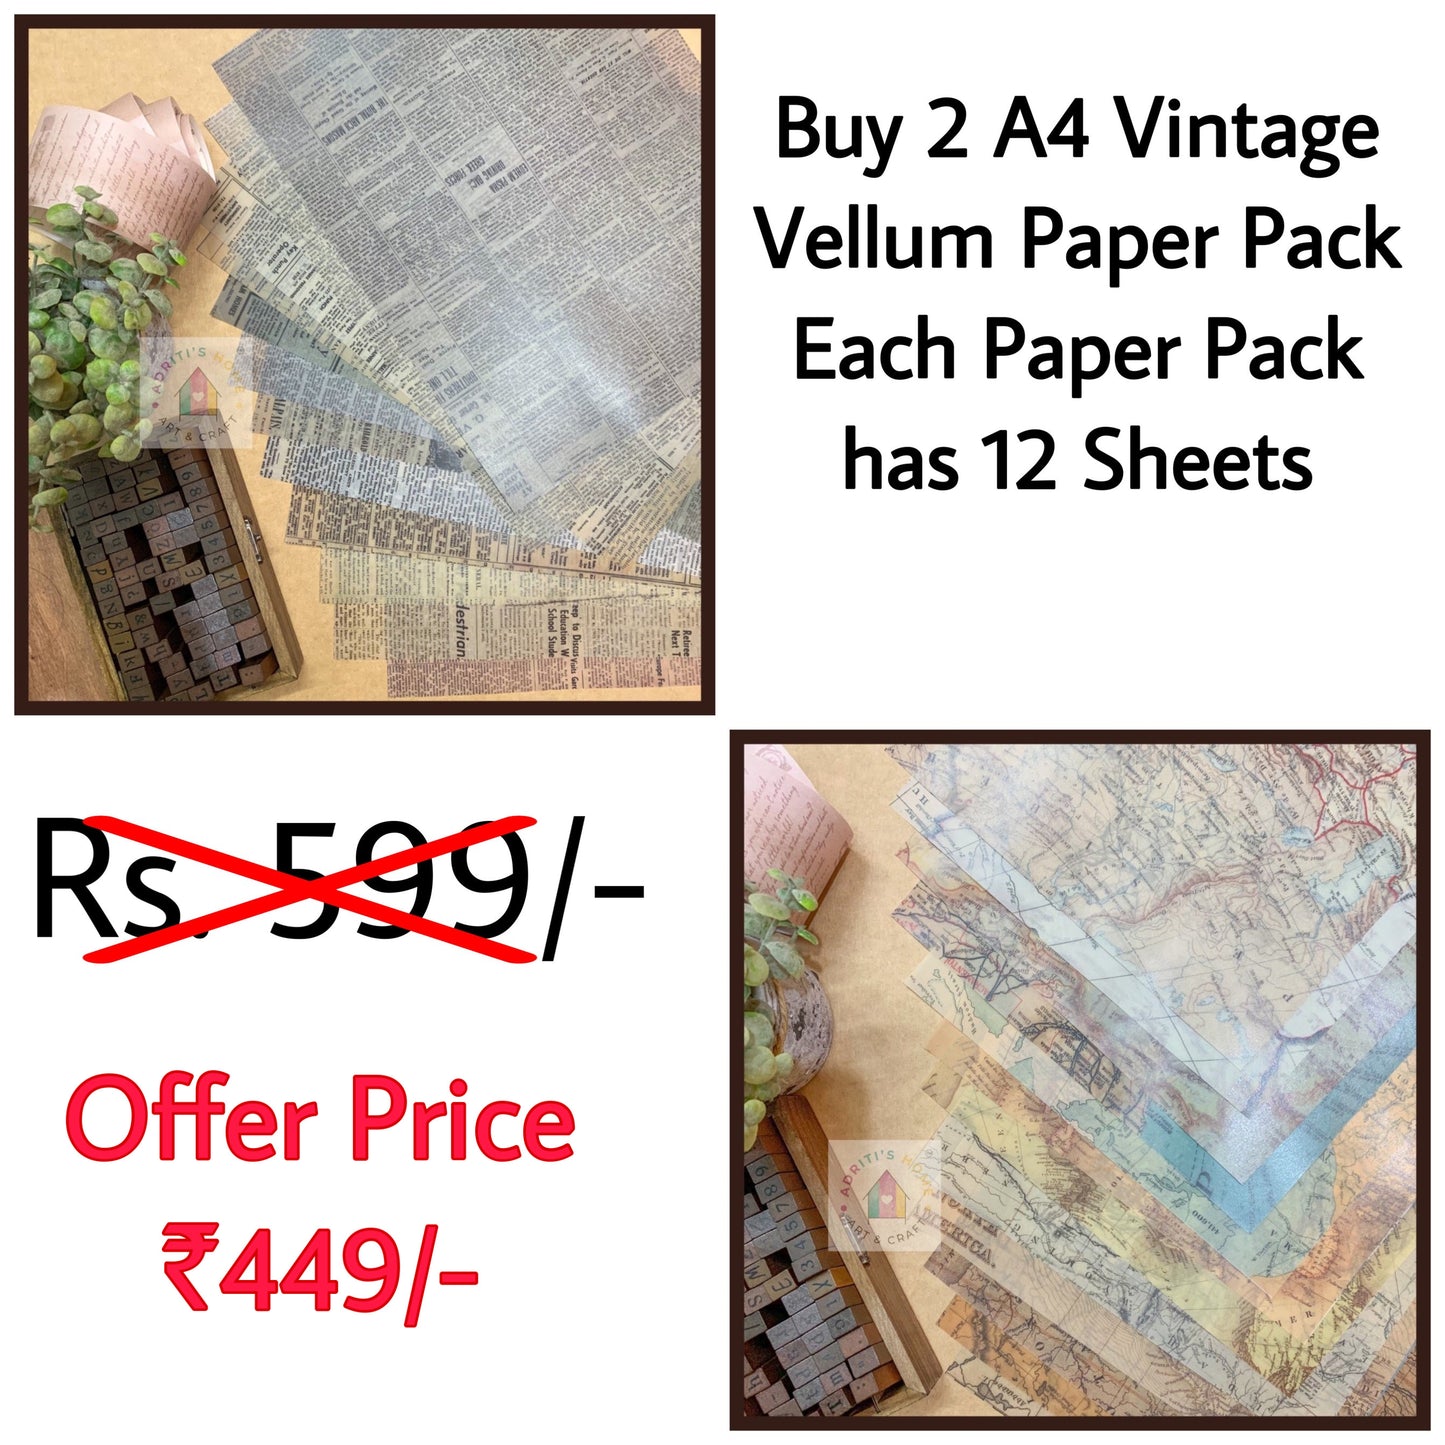 Combo Offer | Buy 2 Vintage Vellum Pack | Each Paper Pack has 12 Sheets